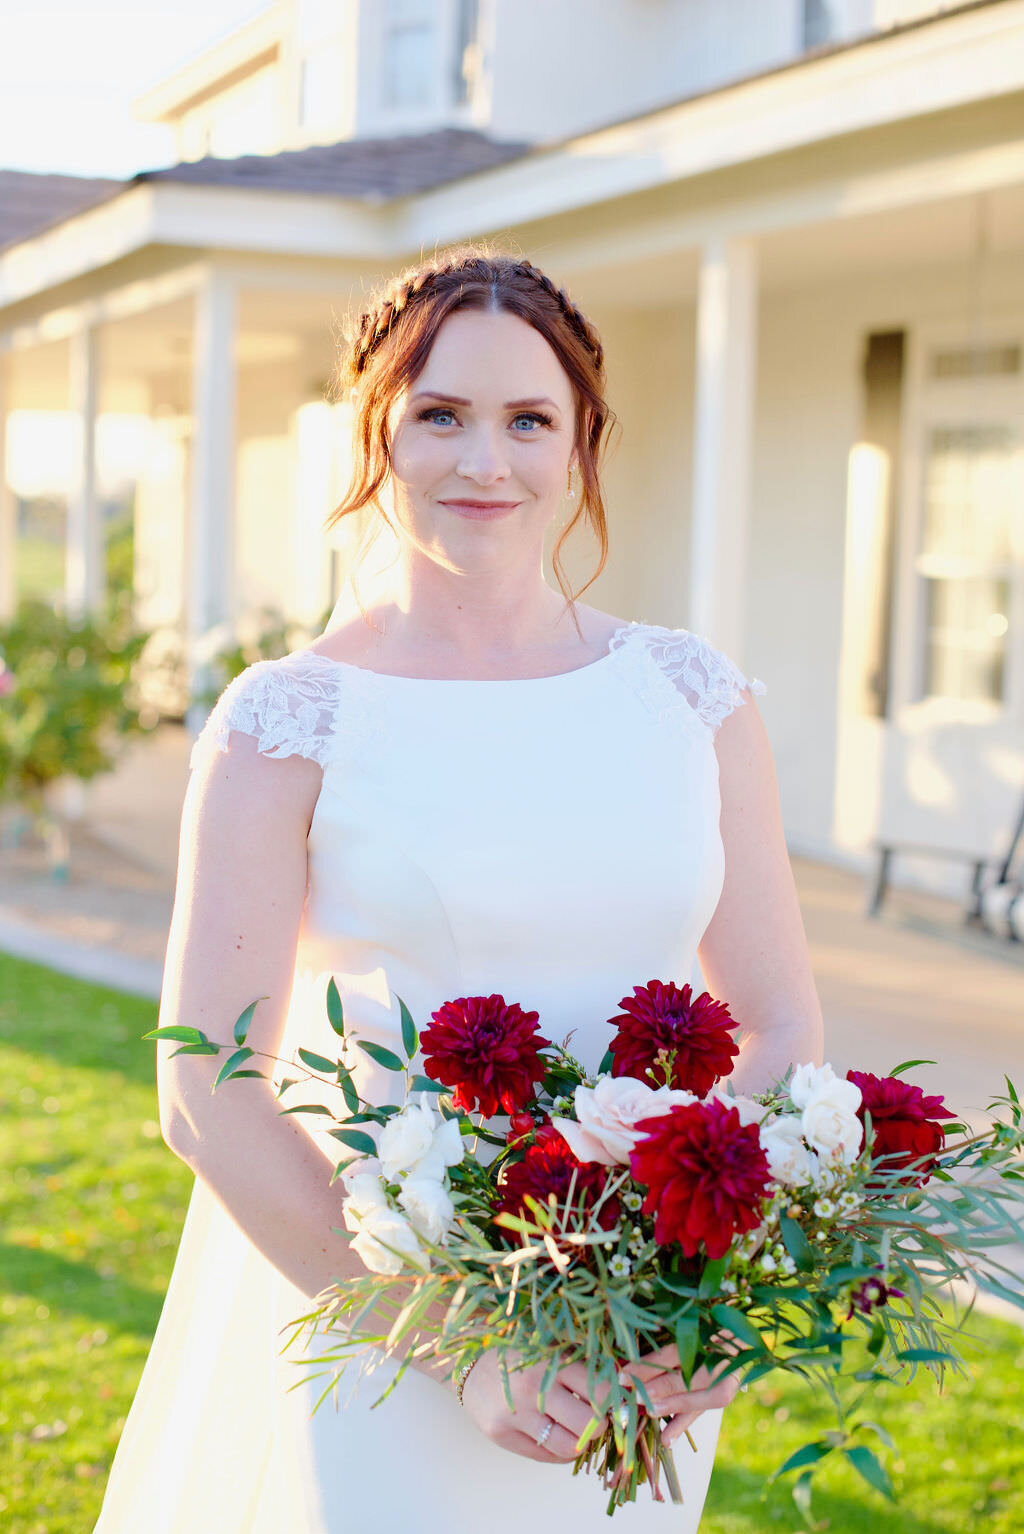 A bride smiling and holding a red and white bouquet of flowers.